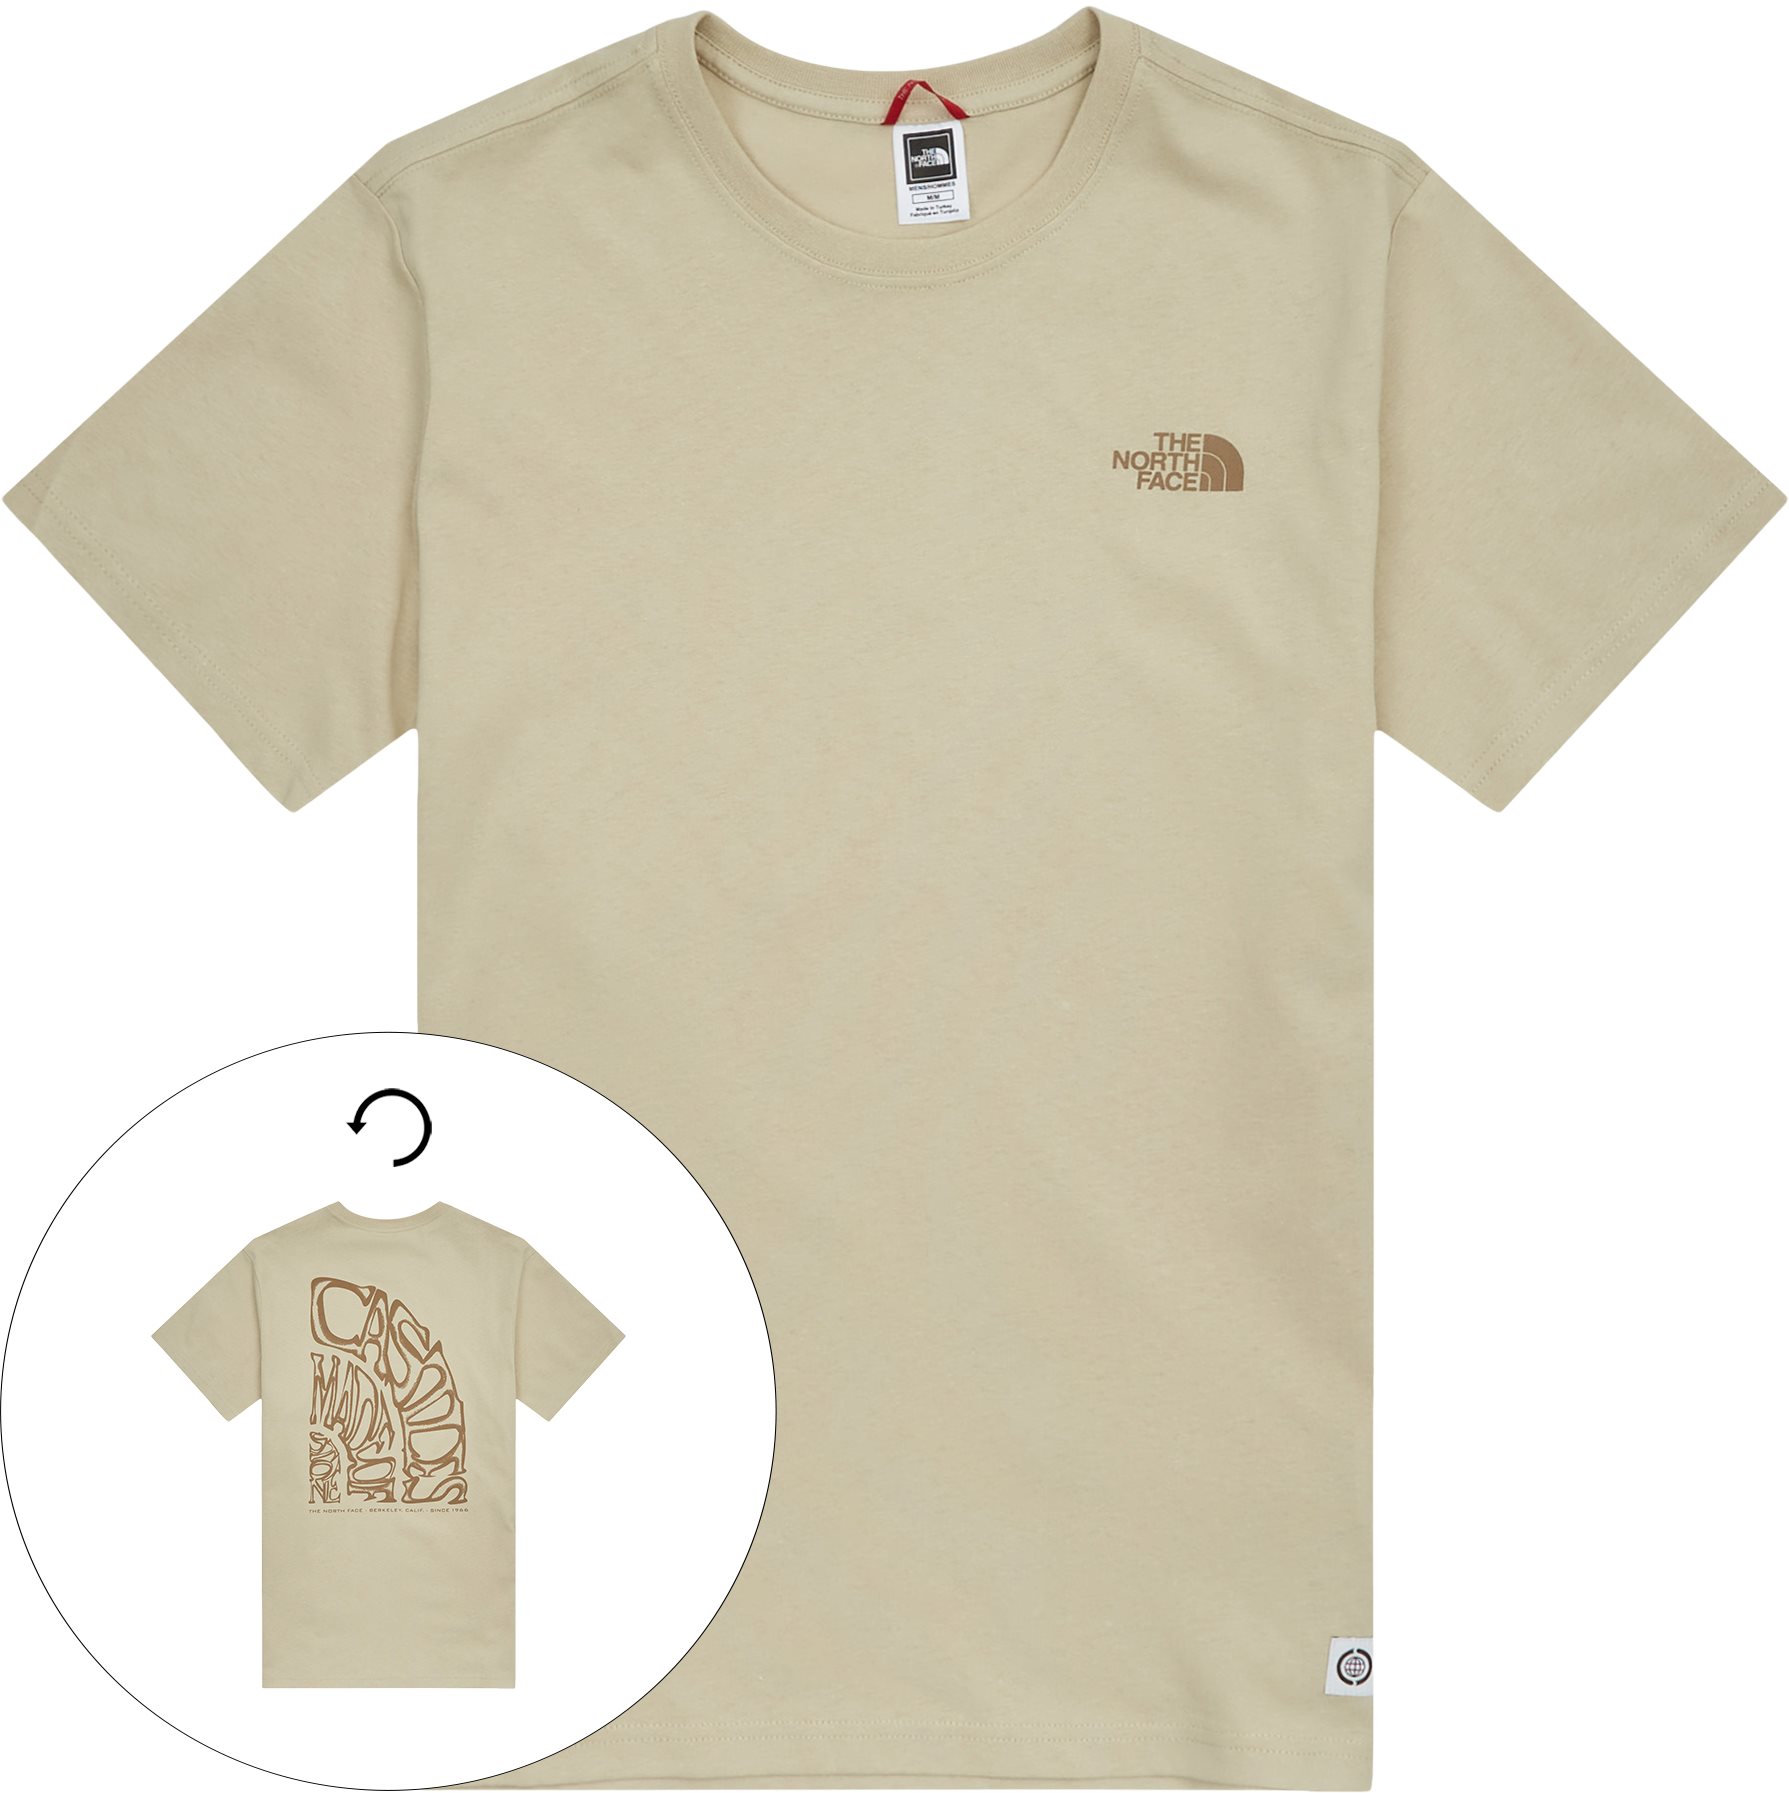 Re-grind Tee - T-shirts - Regular fit - Sand